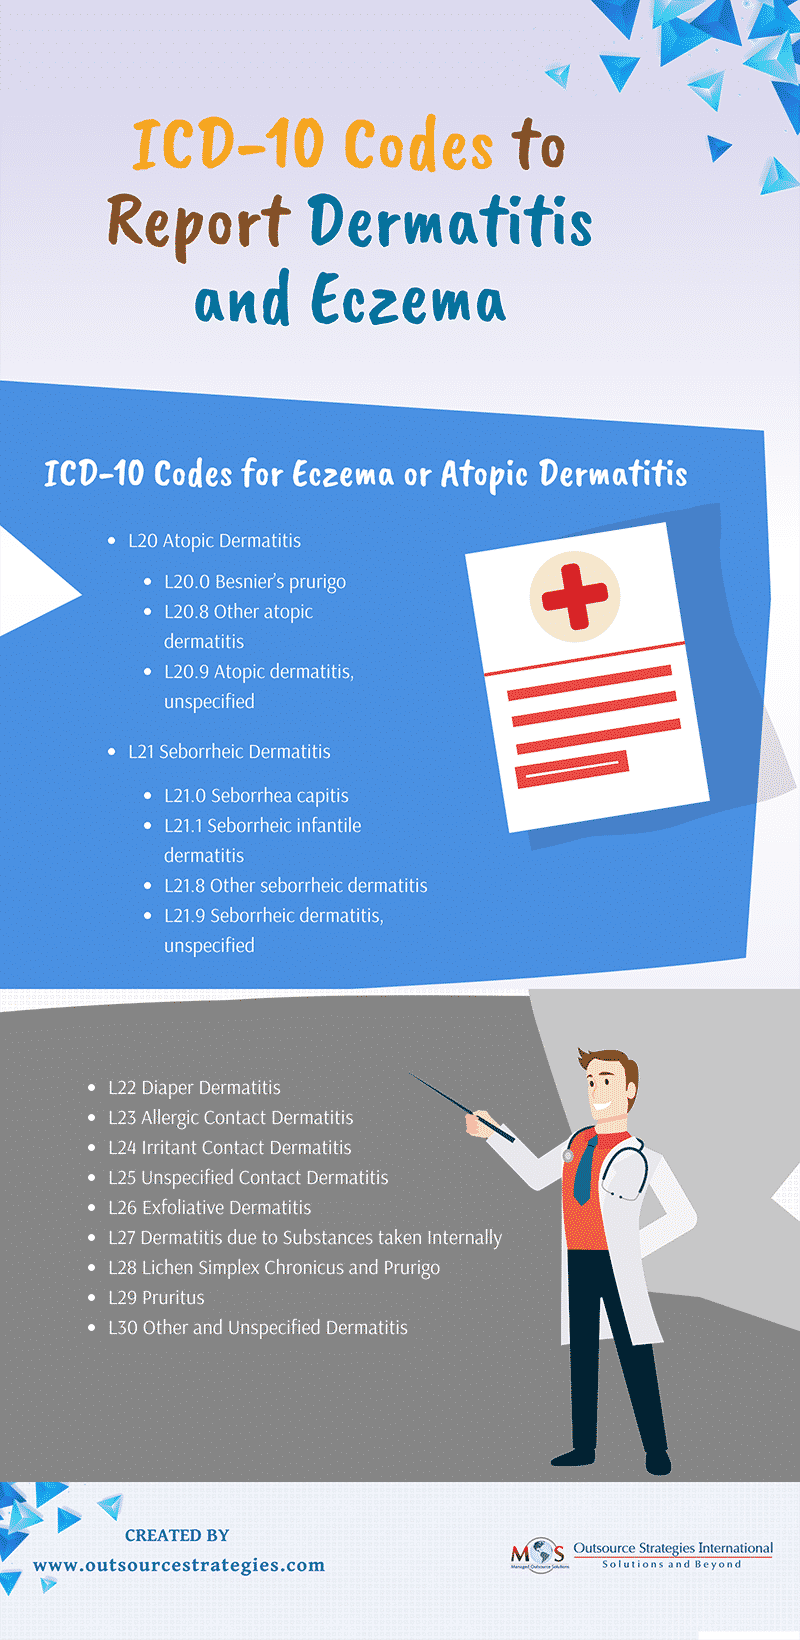 ICD-10 Codes to Report Dermatitis and Eczema